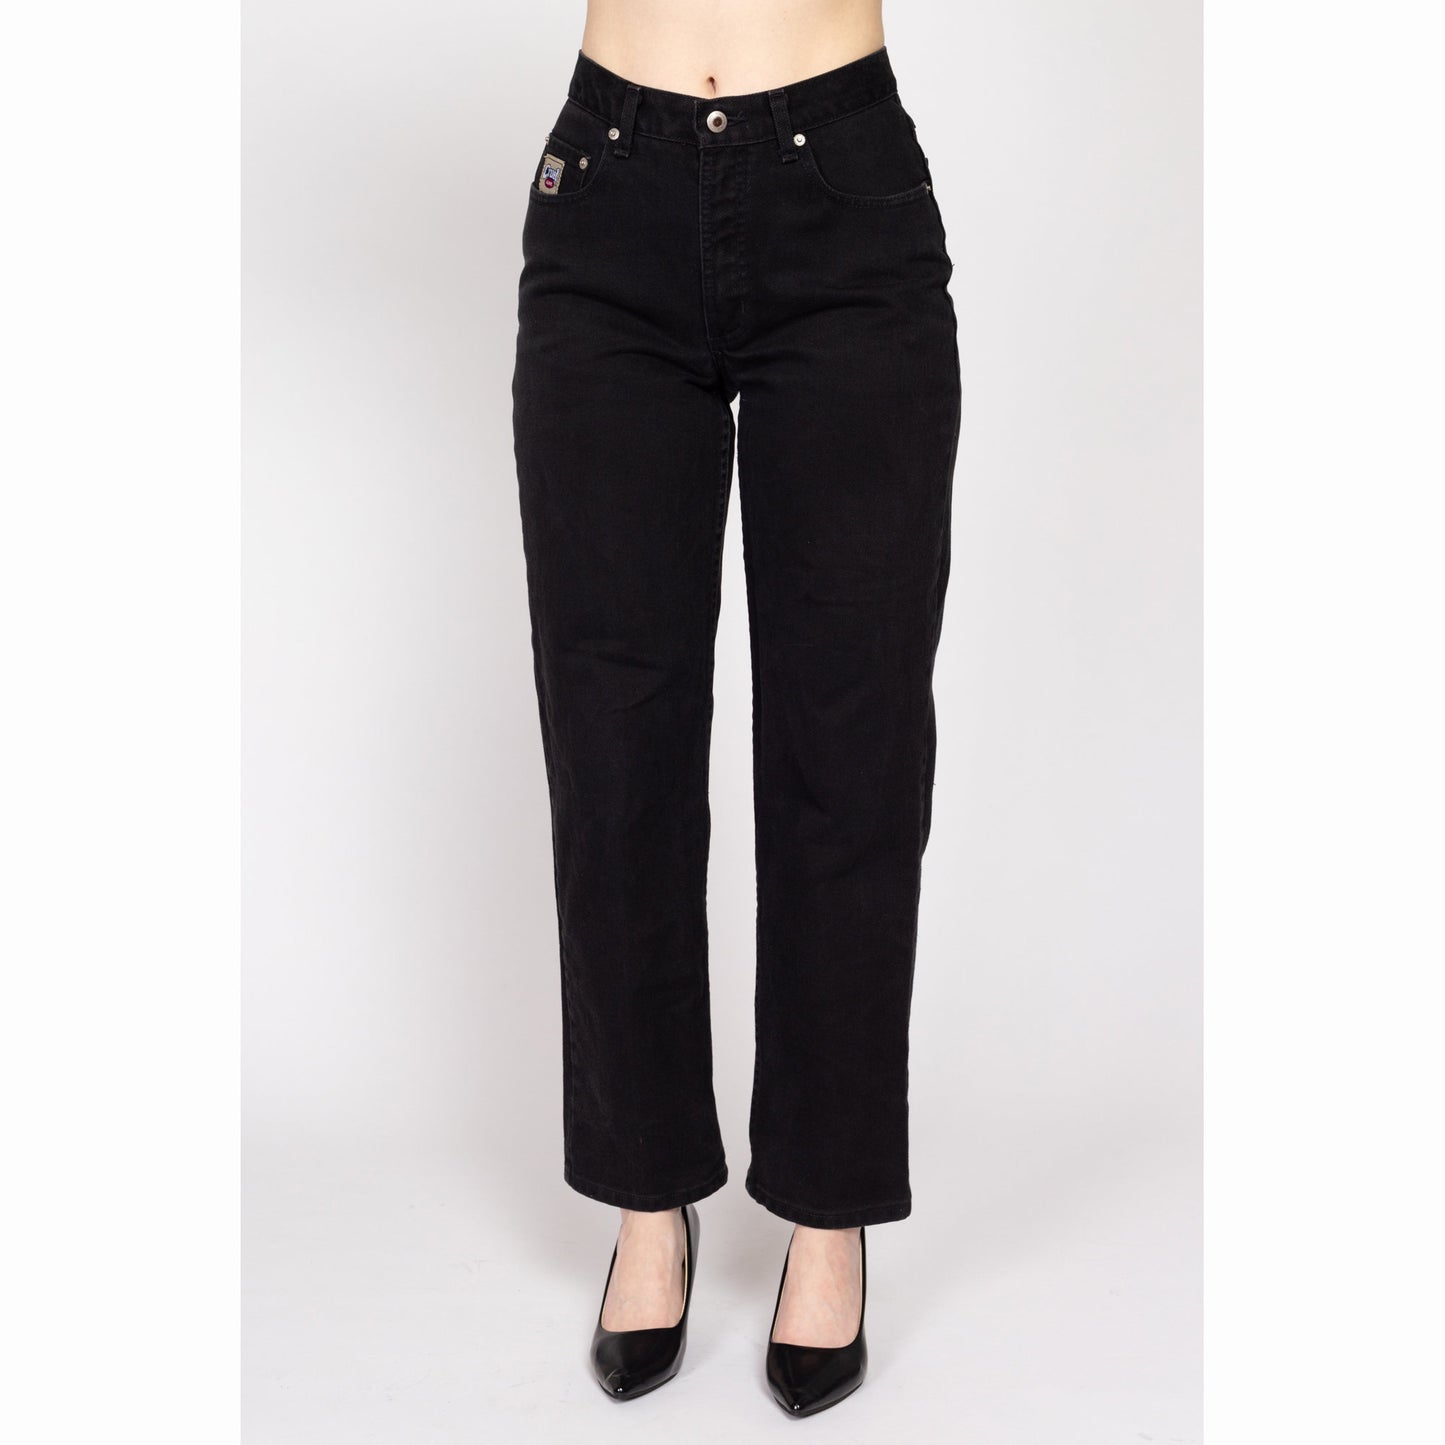 Small 90s Black High Waisted Relaxed Mom Jeans 27" | Vintage Cotton Denim Straight Leg Jeans